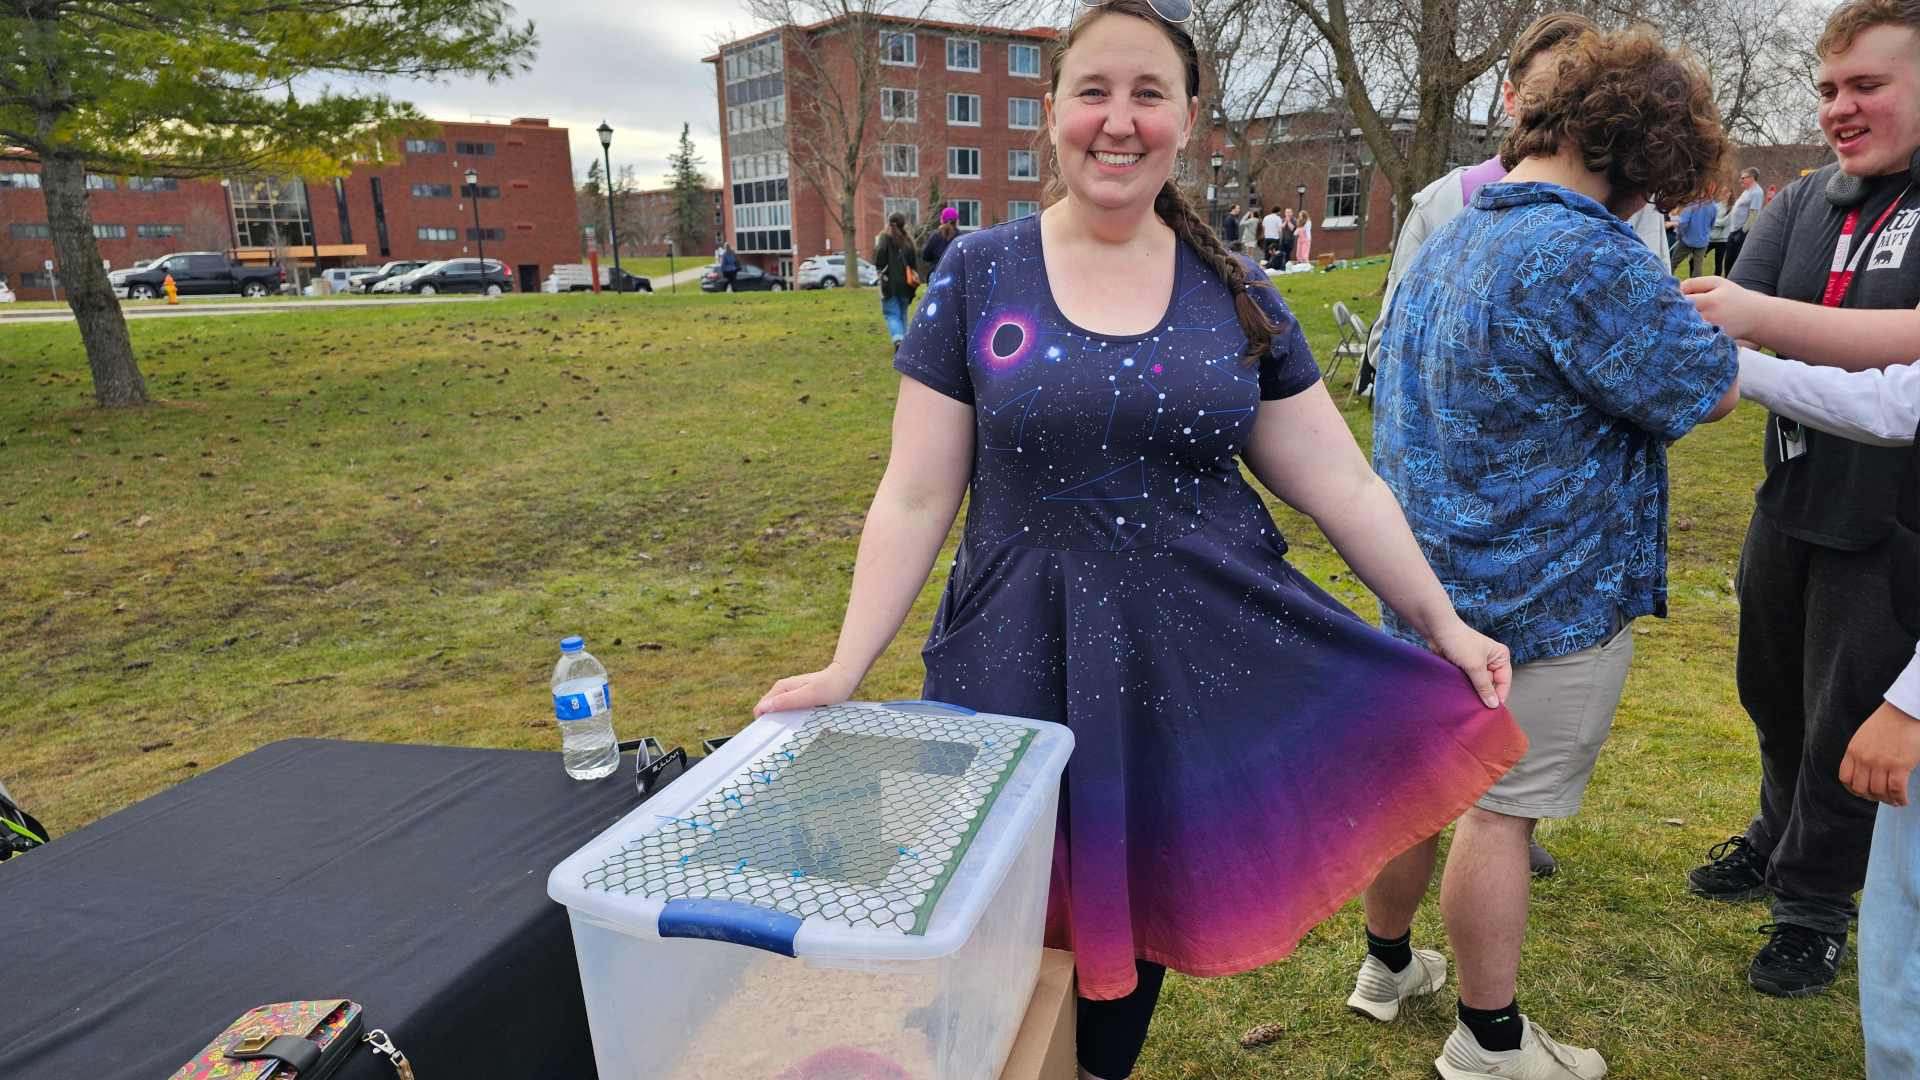 SUNY Potsdam biology professor Sarah Sirsat shows off a solar eclipse dress while showing how quail and other animals react to the total solar eclipse dress on April 8, 2024.